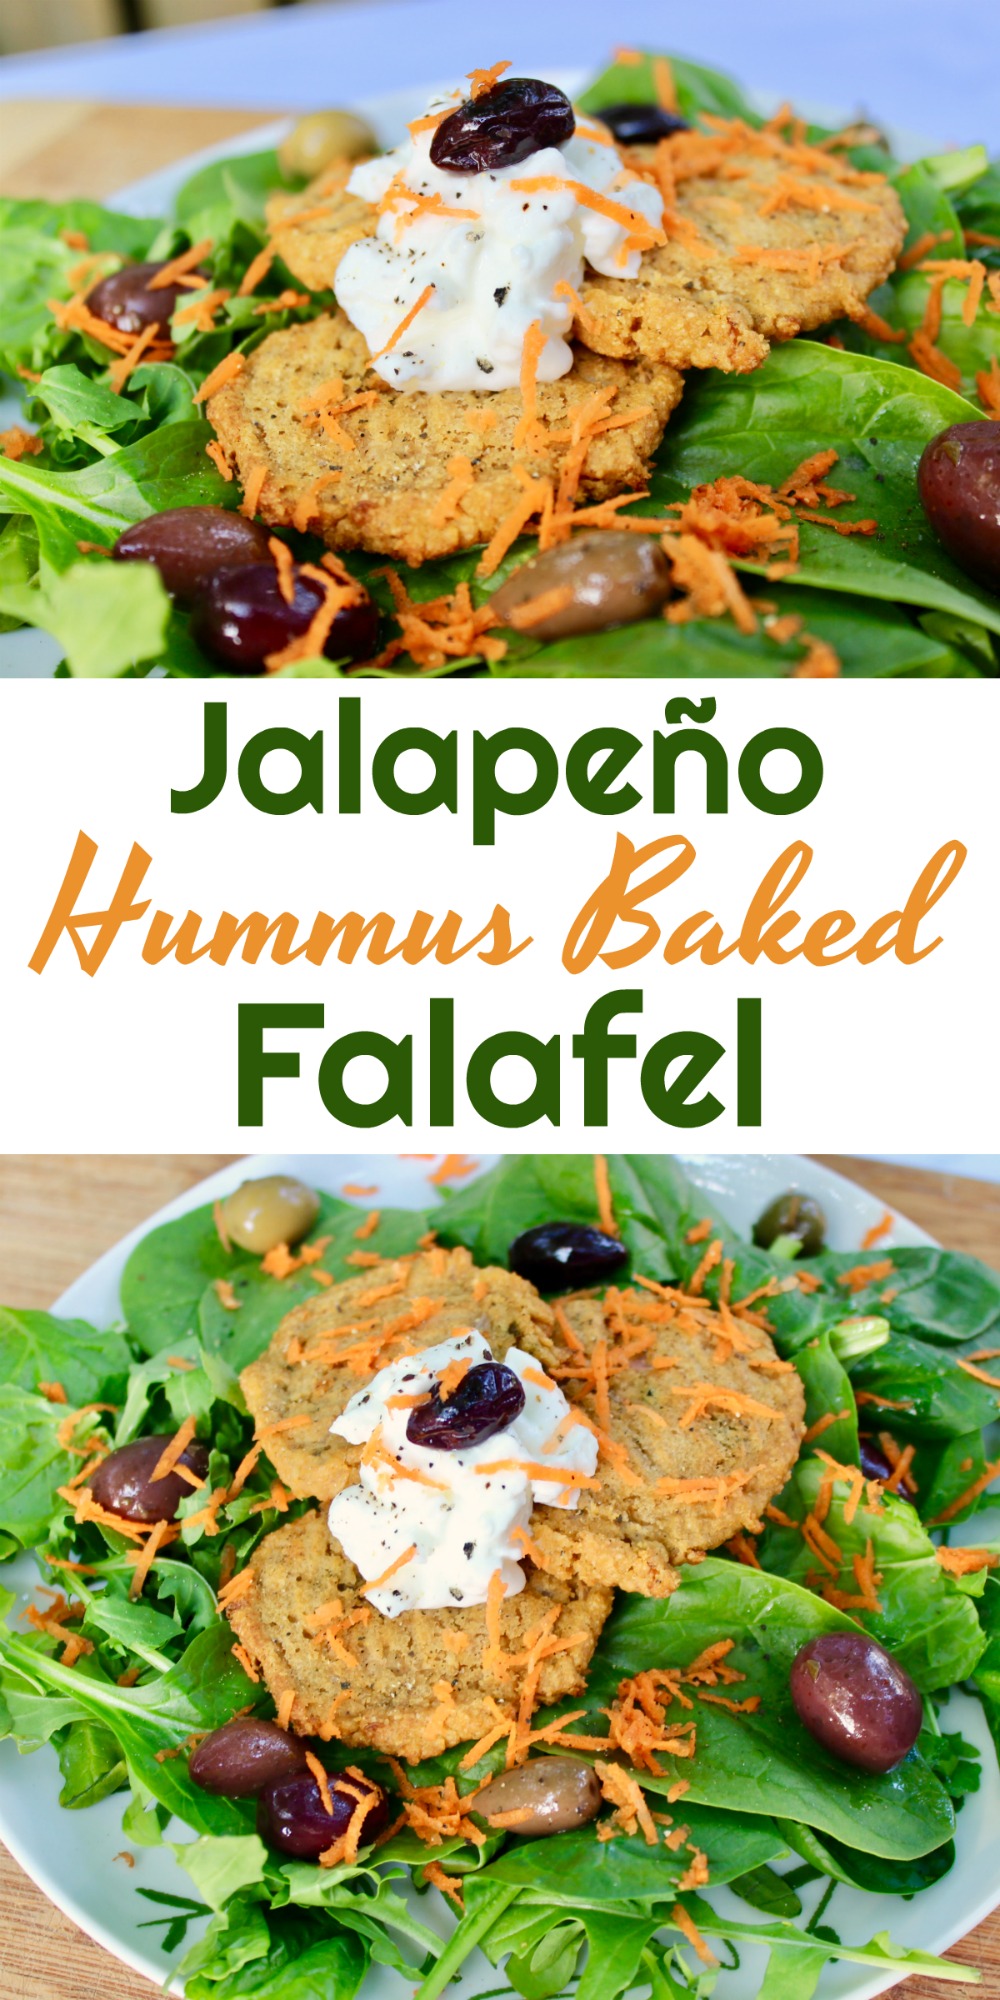 Jalapeño Hummus Baked Falafel is a healthier version of a classic Mediterranean dish.  It's made even easier by skipping the chickpeas and simply using hummus for the batter!